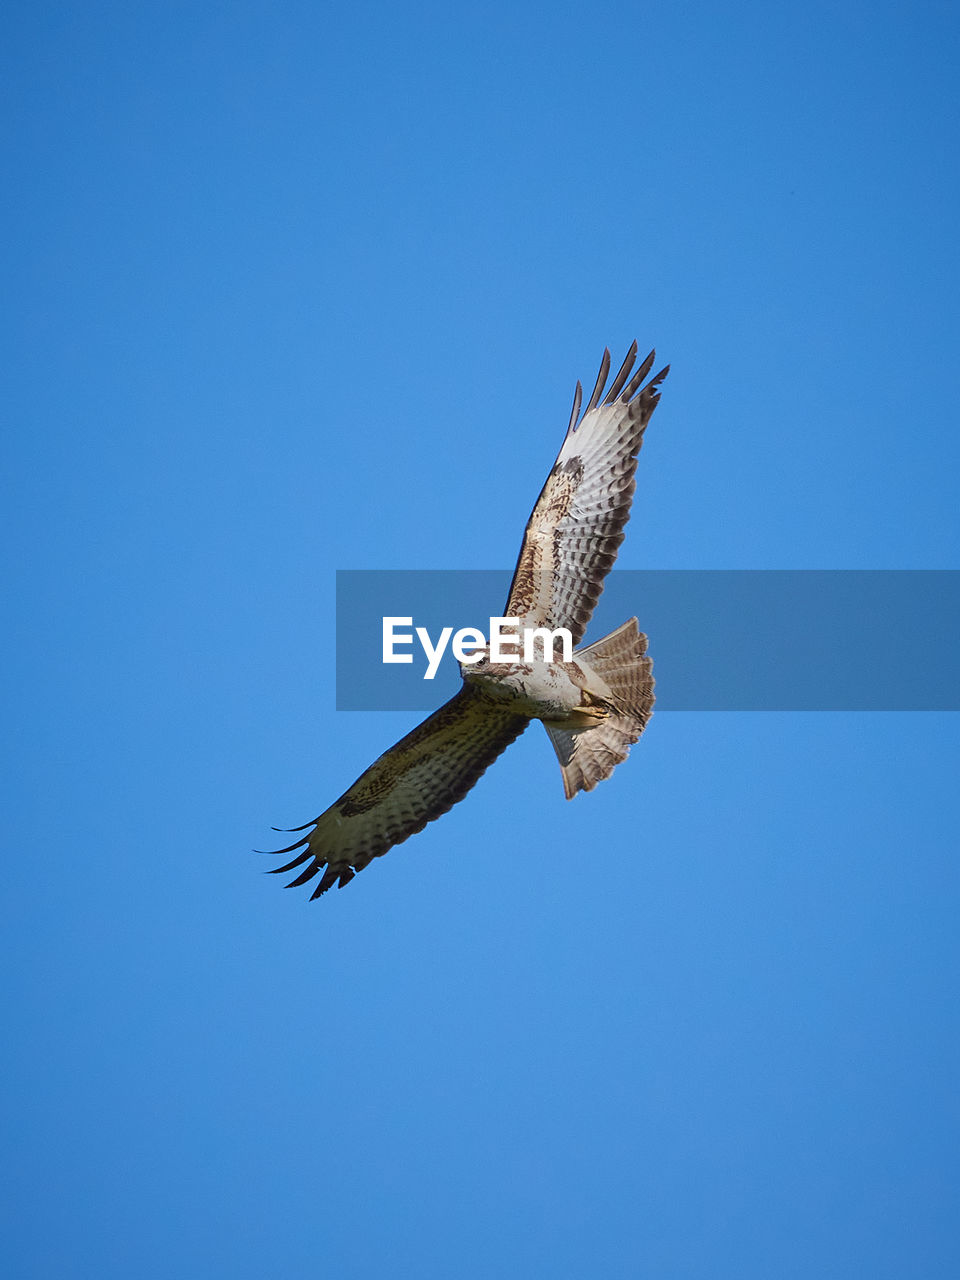 LOW ANGLE VIEW OF BIRD FLYING AGAINST CLEAR BLUE SKY